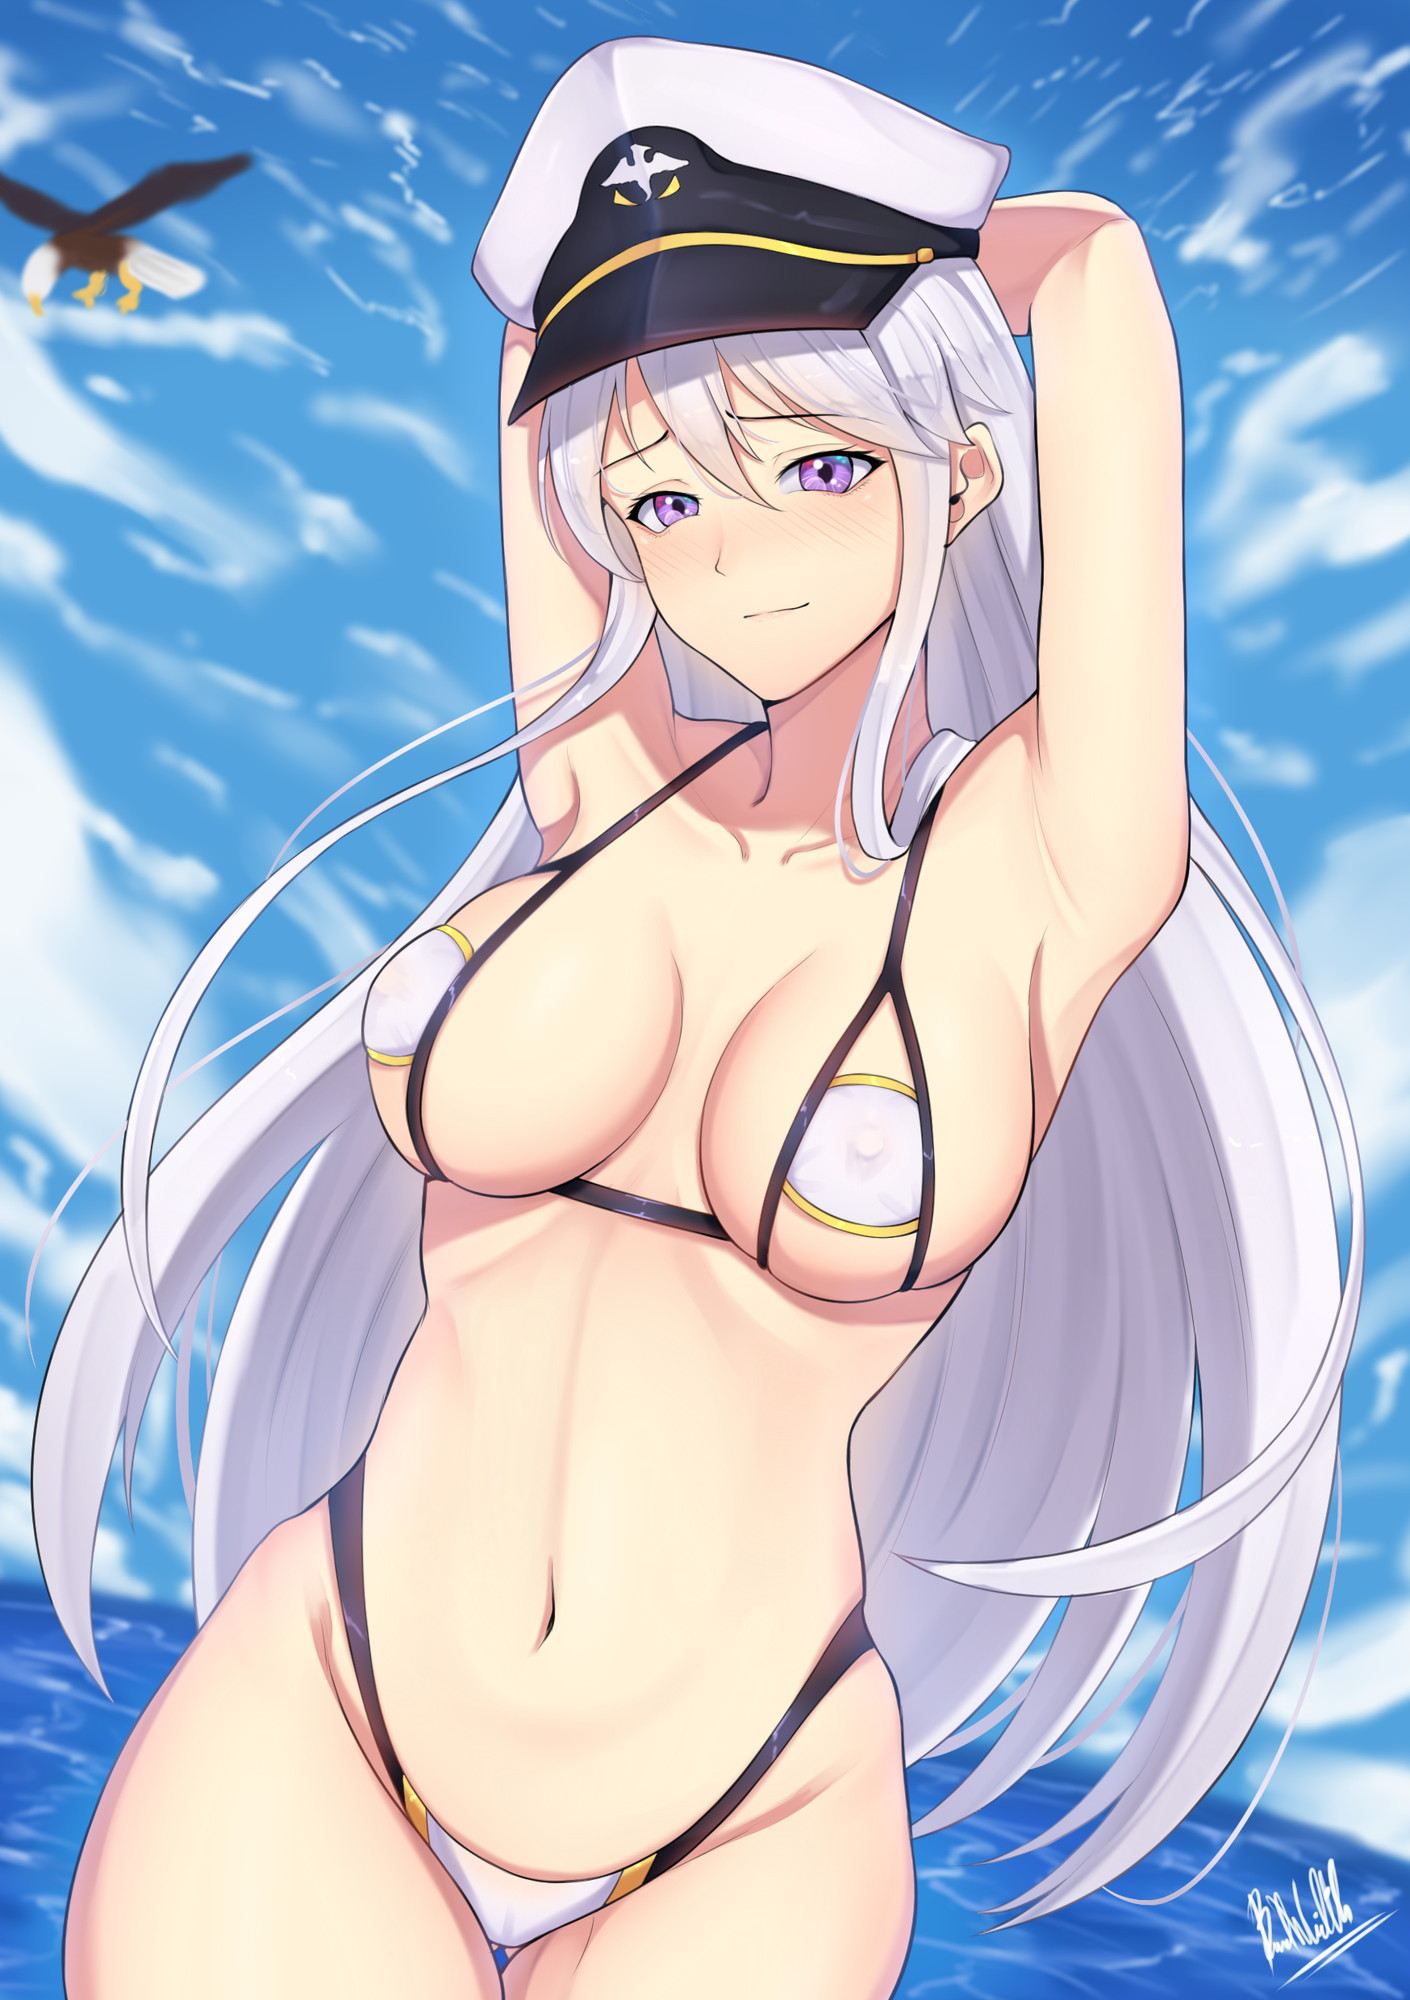 Gather people who want to see the erotic images of Azur Lane! 6